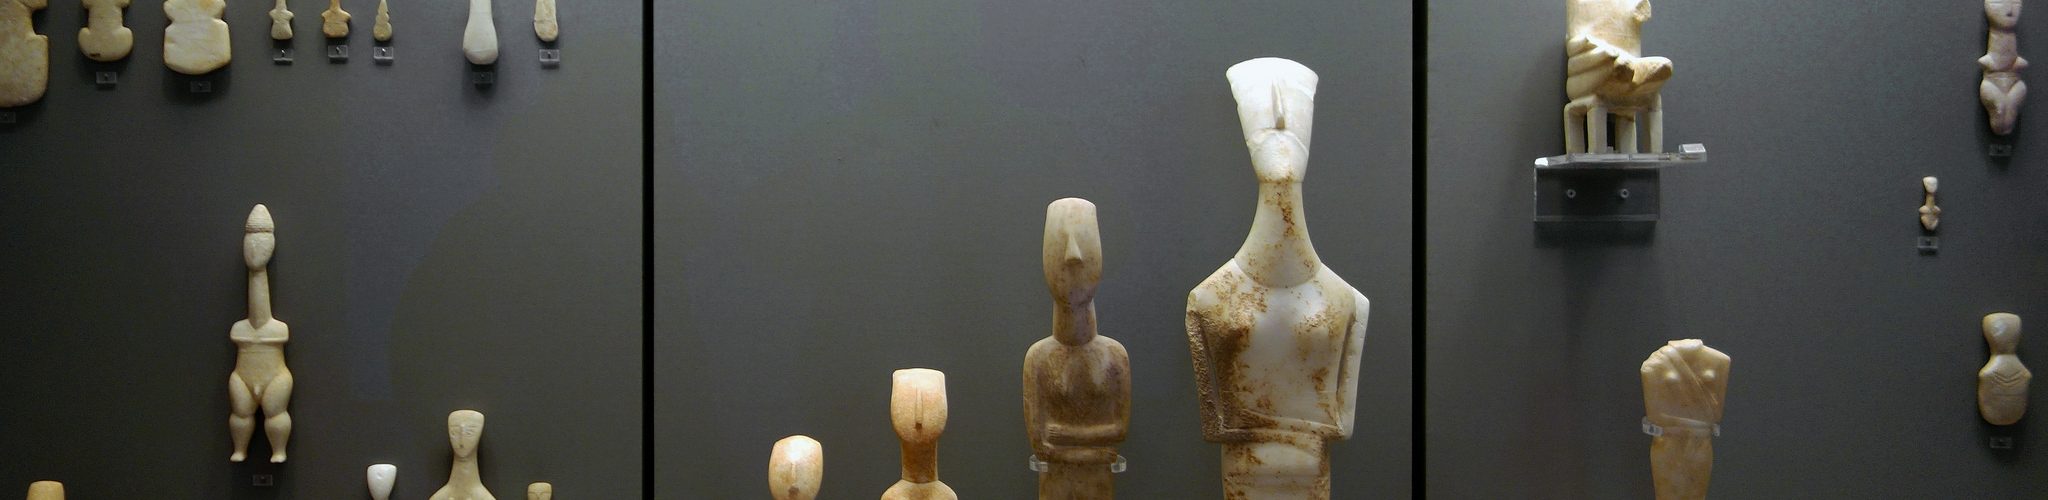 Cycladic period figures, marble, (National Archaeological Museum, Athens)